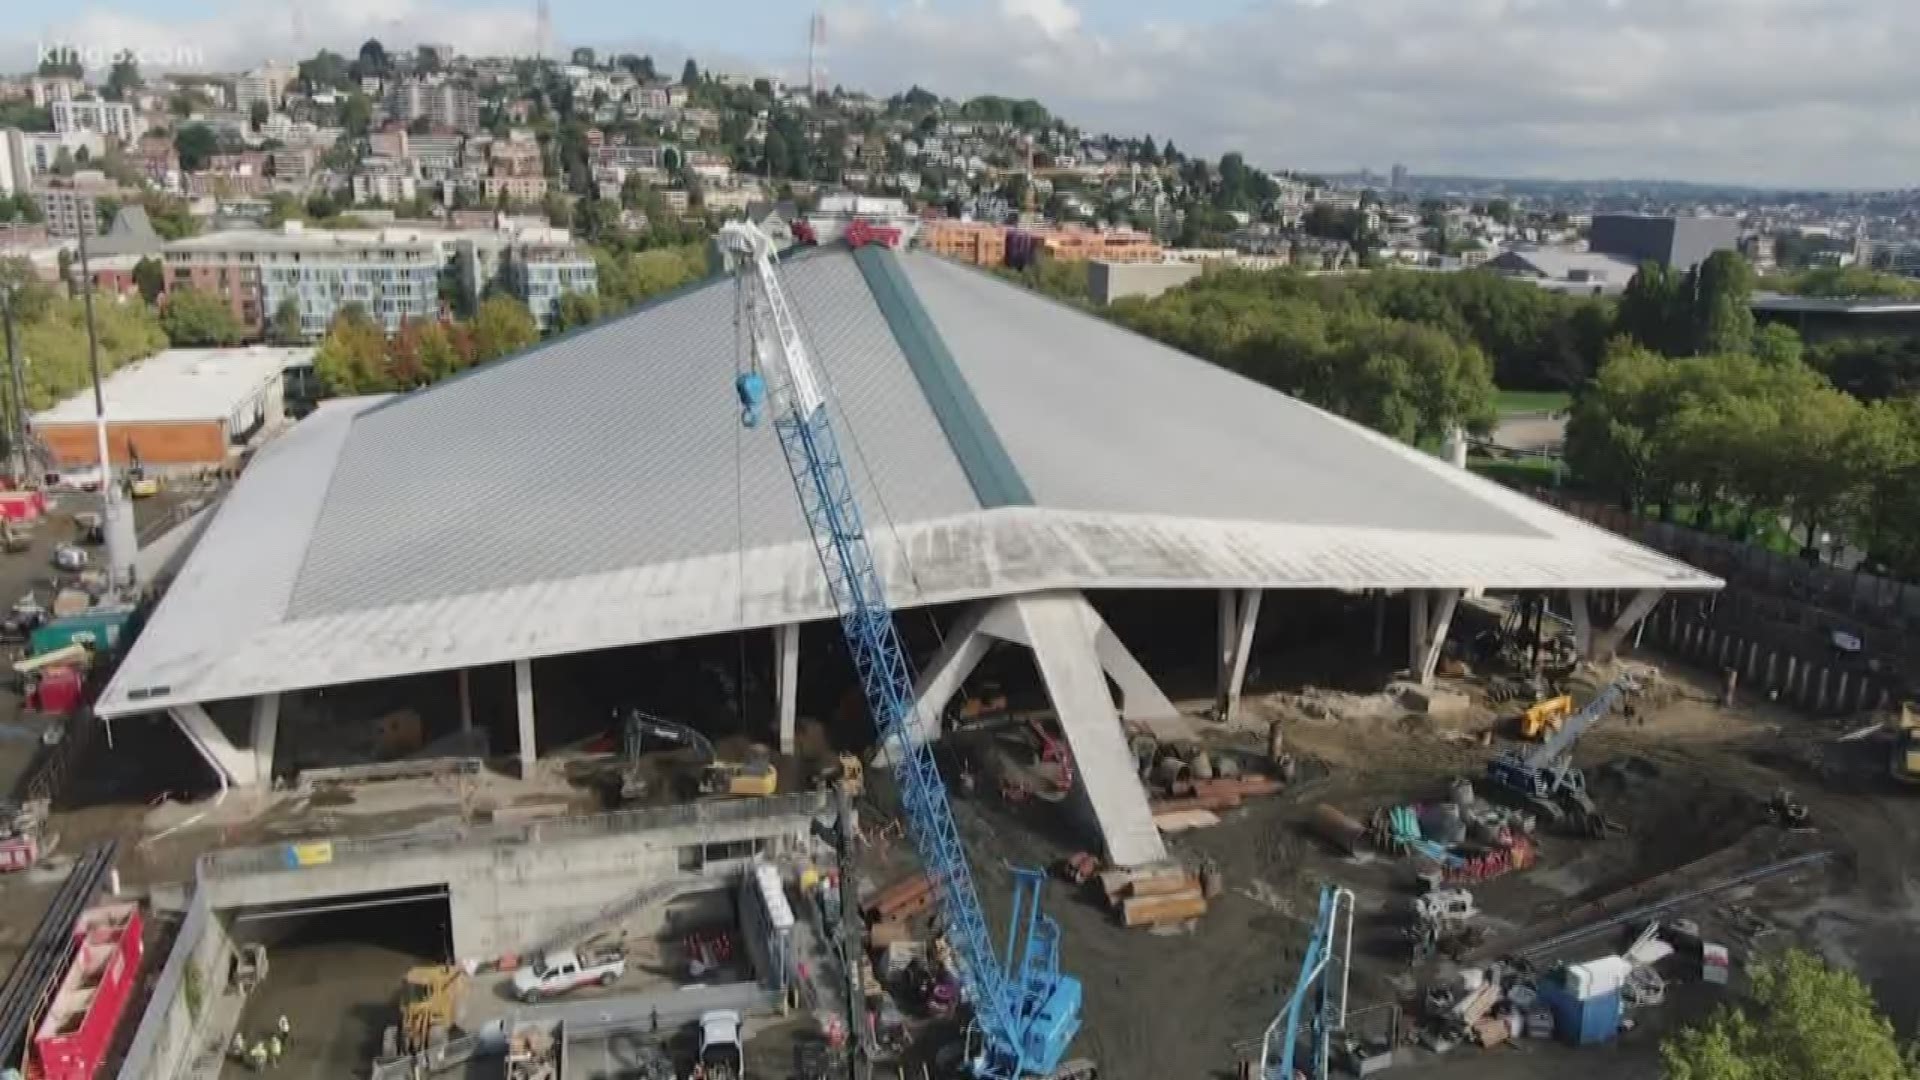 The old KeyArena is now a mud and dirt pit in place of where the Sonics and Storm once played to make way for a new arena to house Seattle's NHL team.